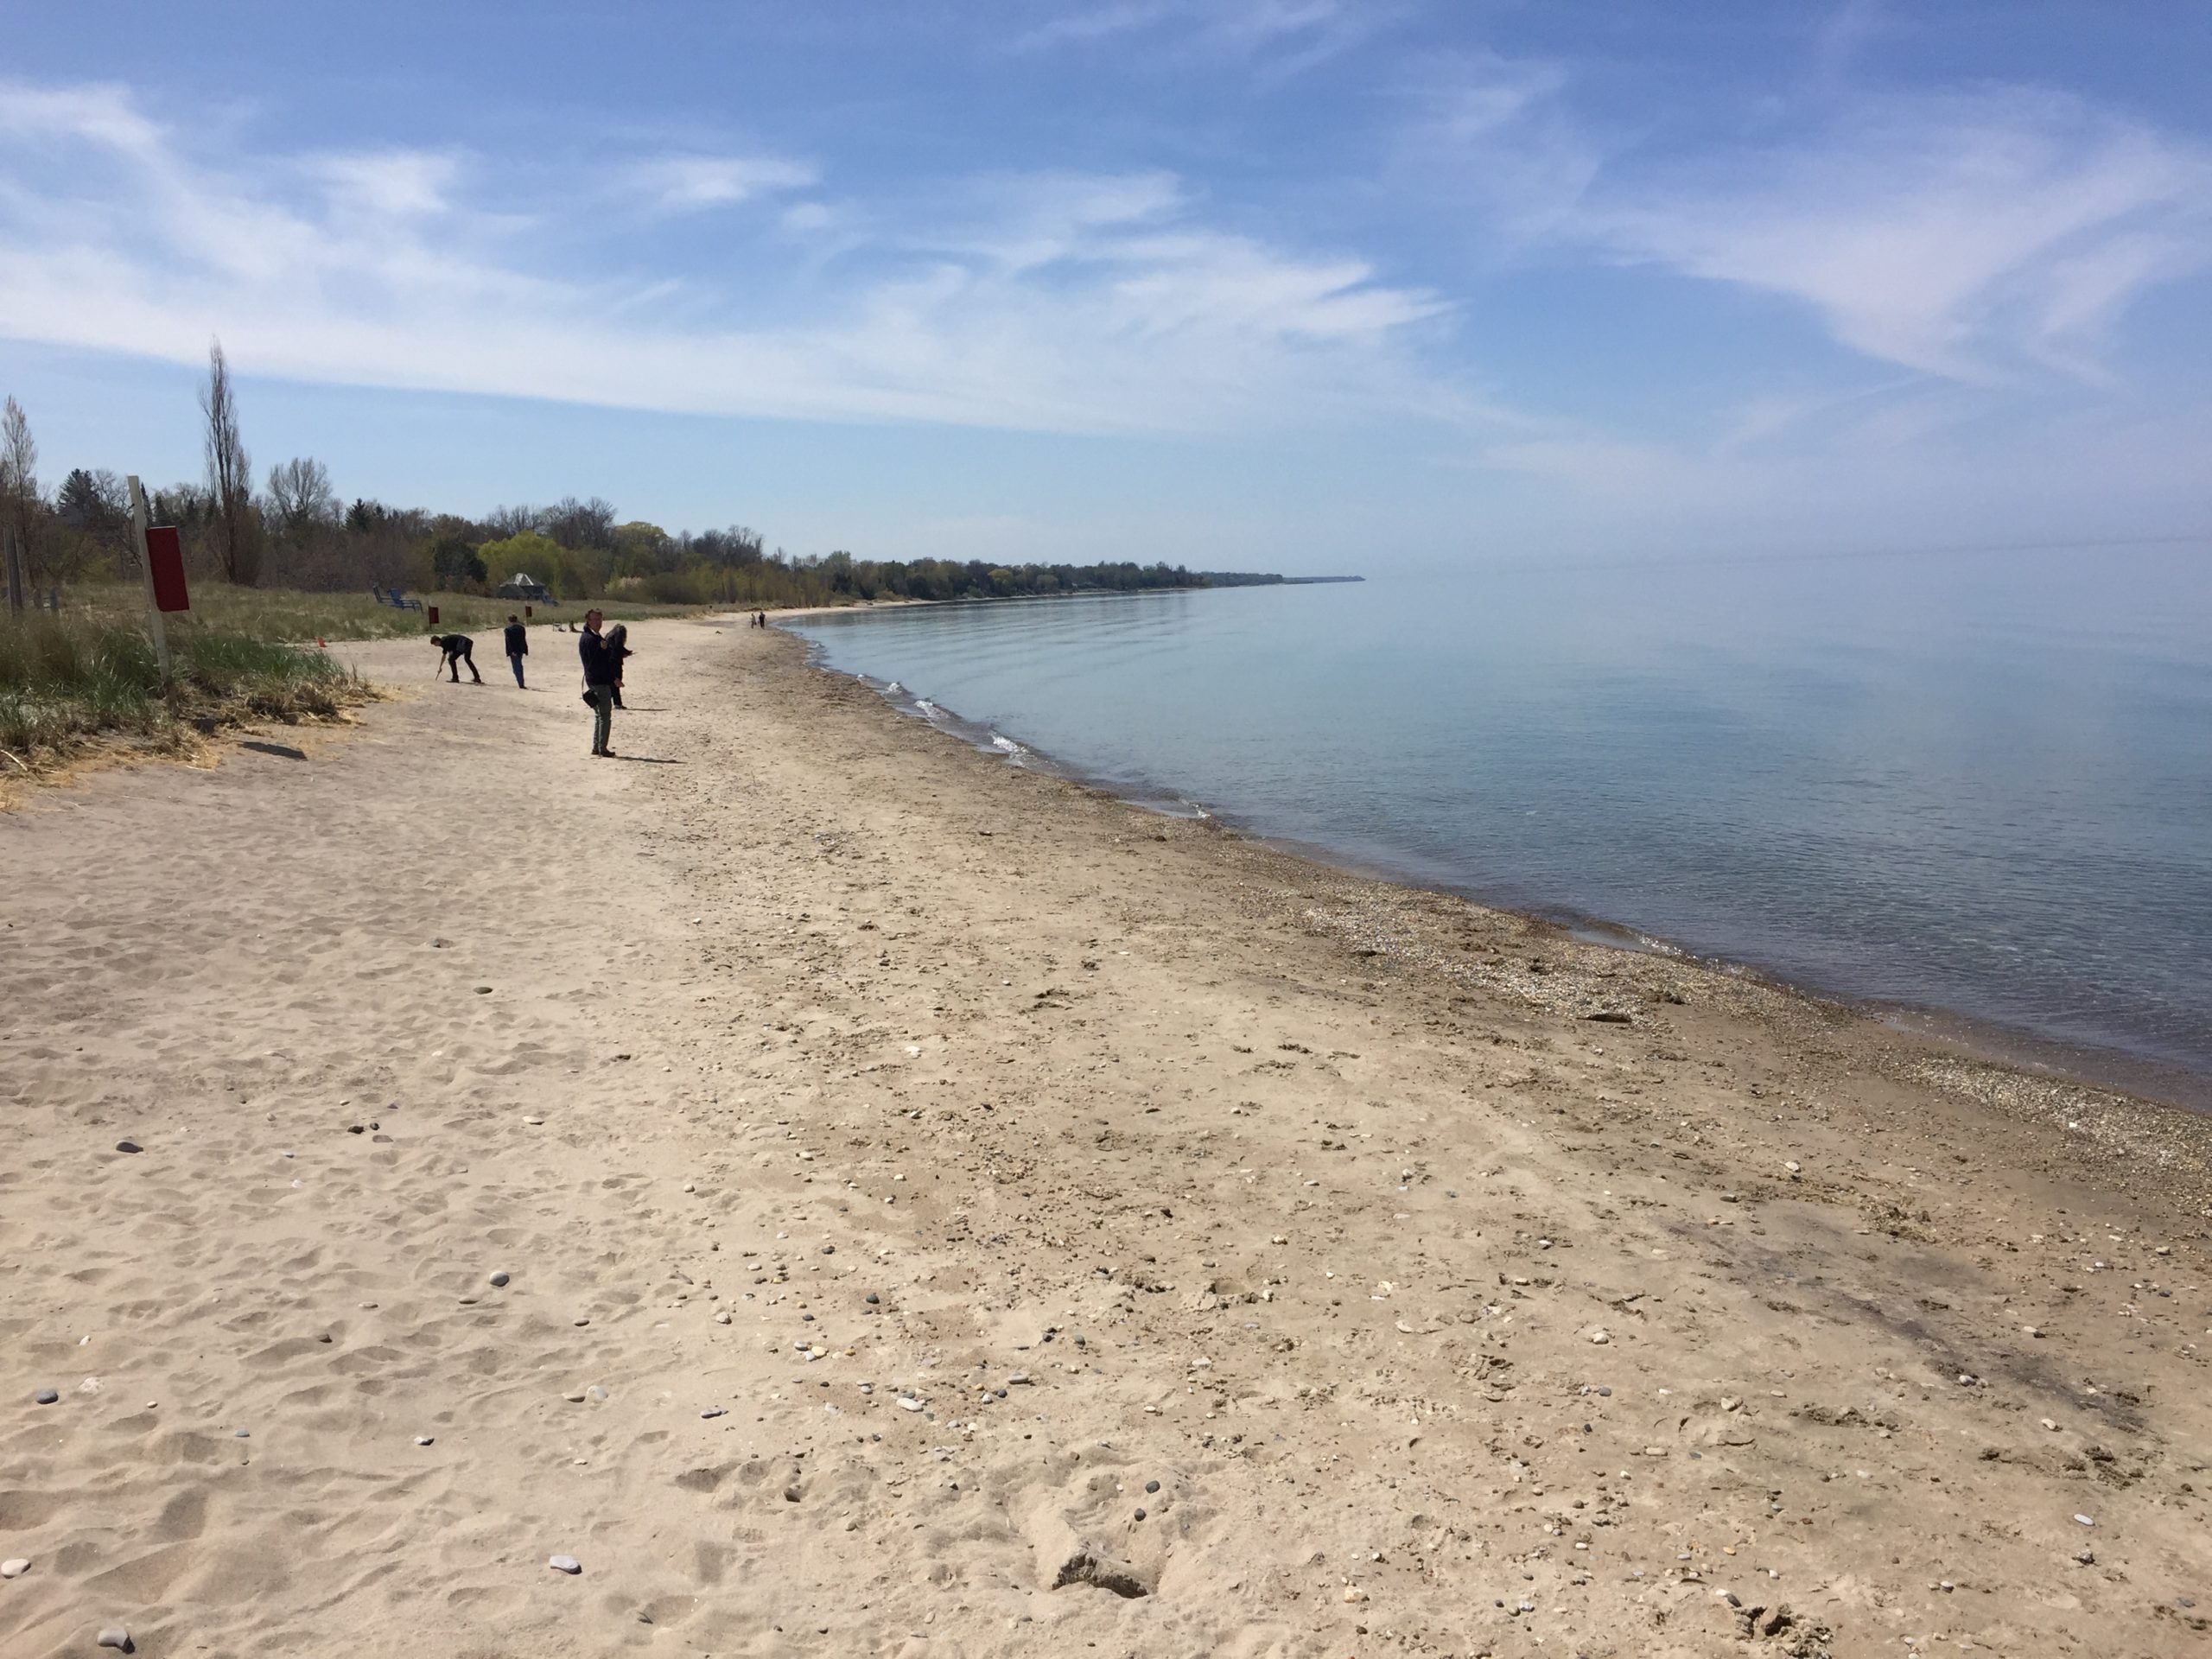 kincardine first responders ask people to exercise caution around water scaled